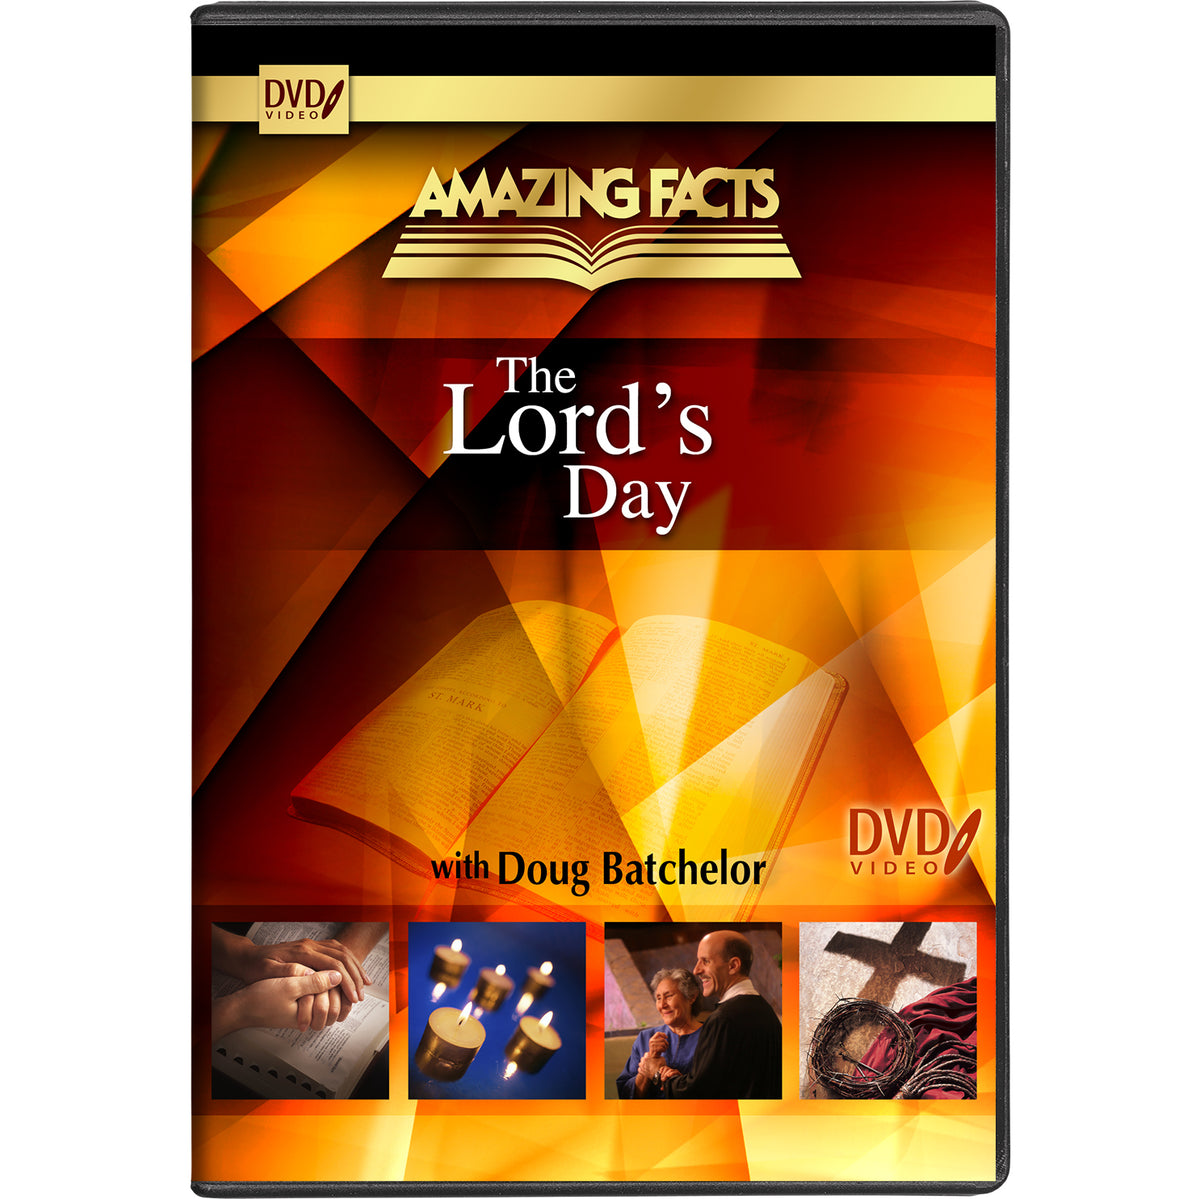 The Lord's Day DVD Set by Doug Batchelor